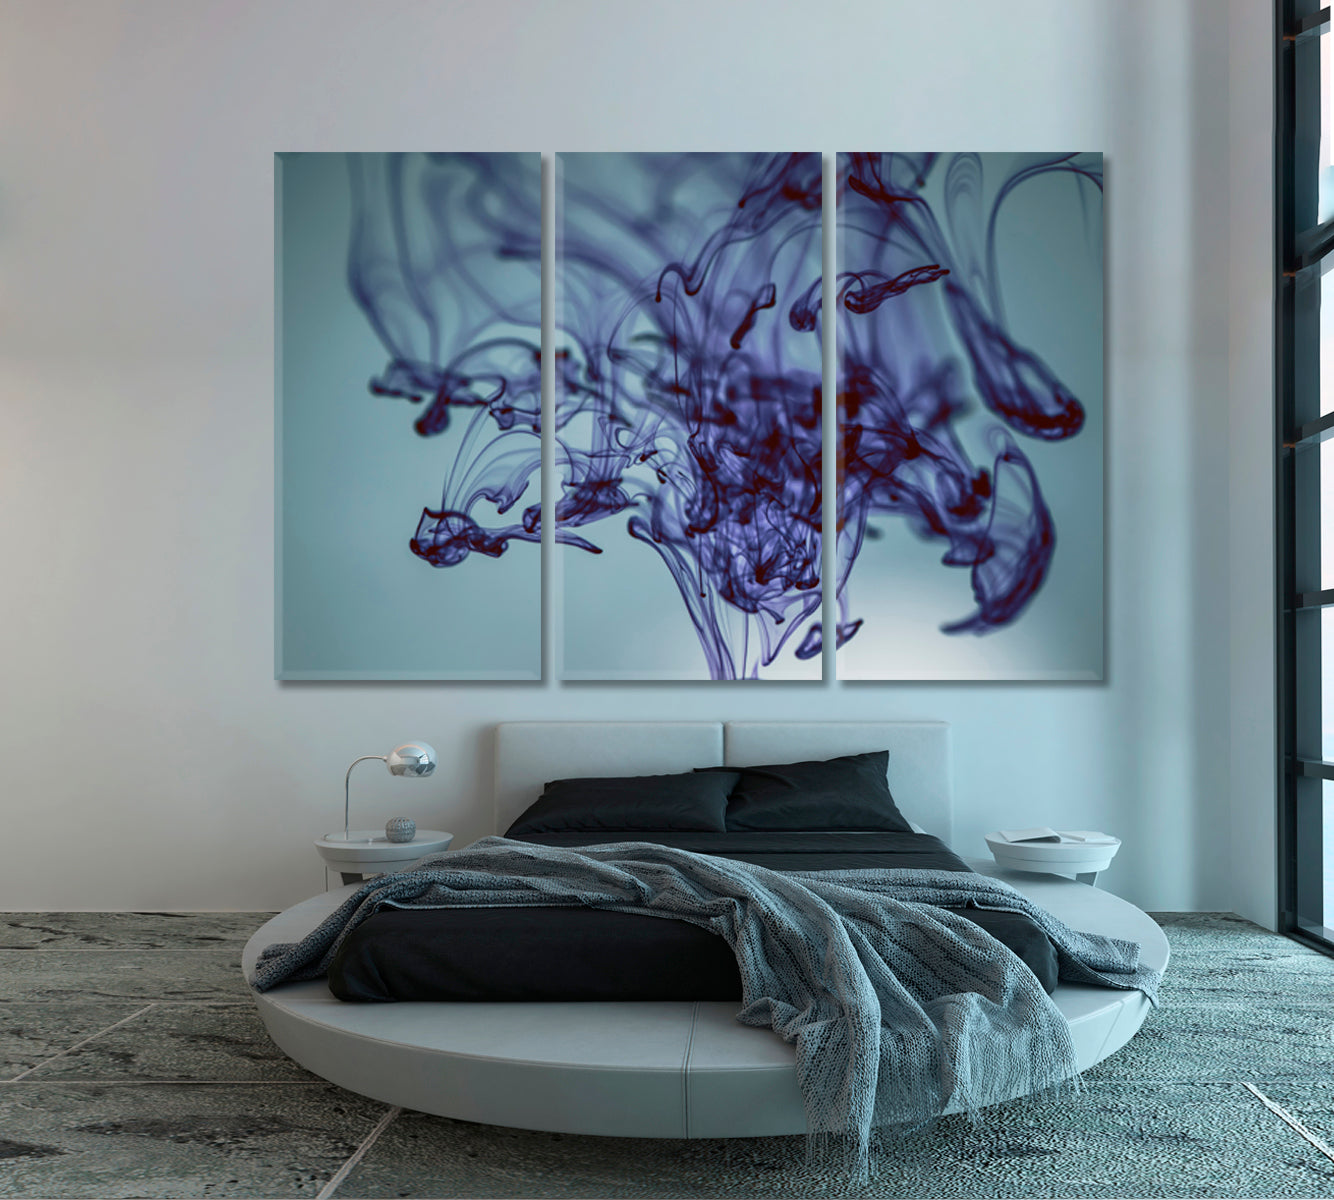 INK IN WATER Abstract Painting Fluid Art, Oriental Marbling Canvas Print Artesty 3 panels 36" x 24" 